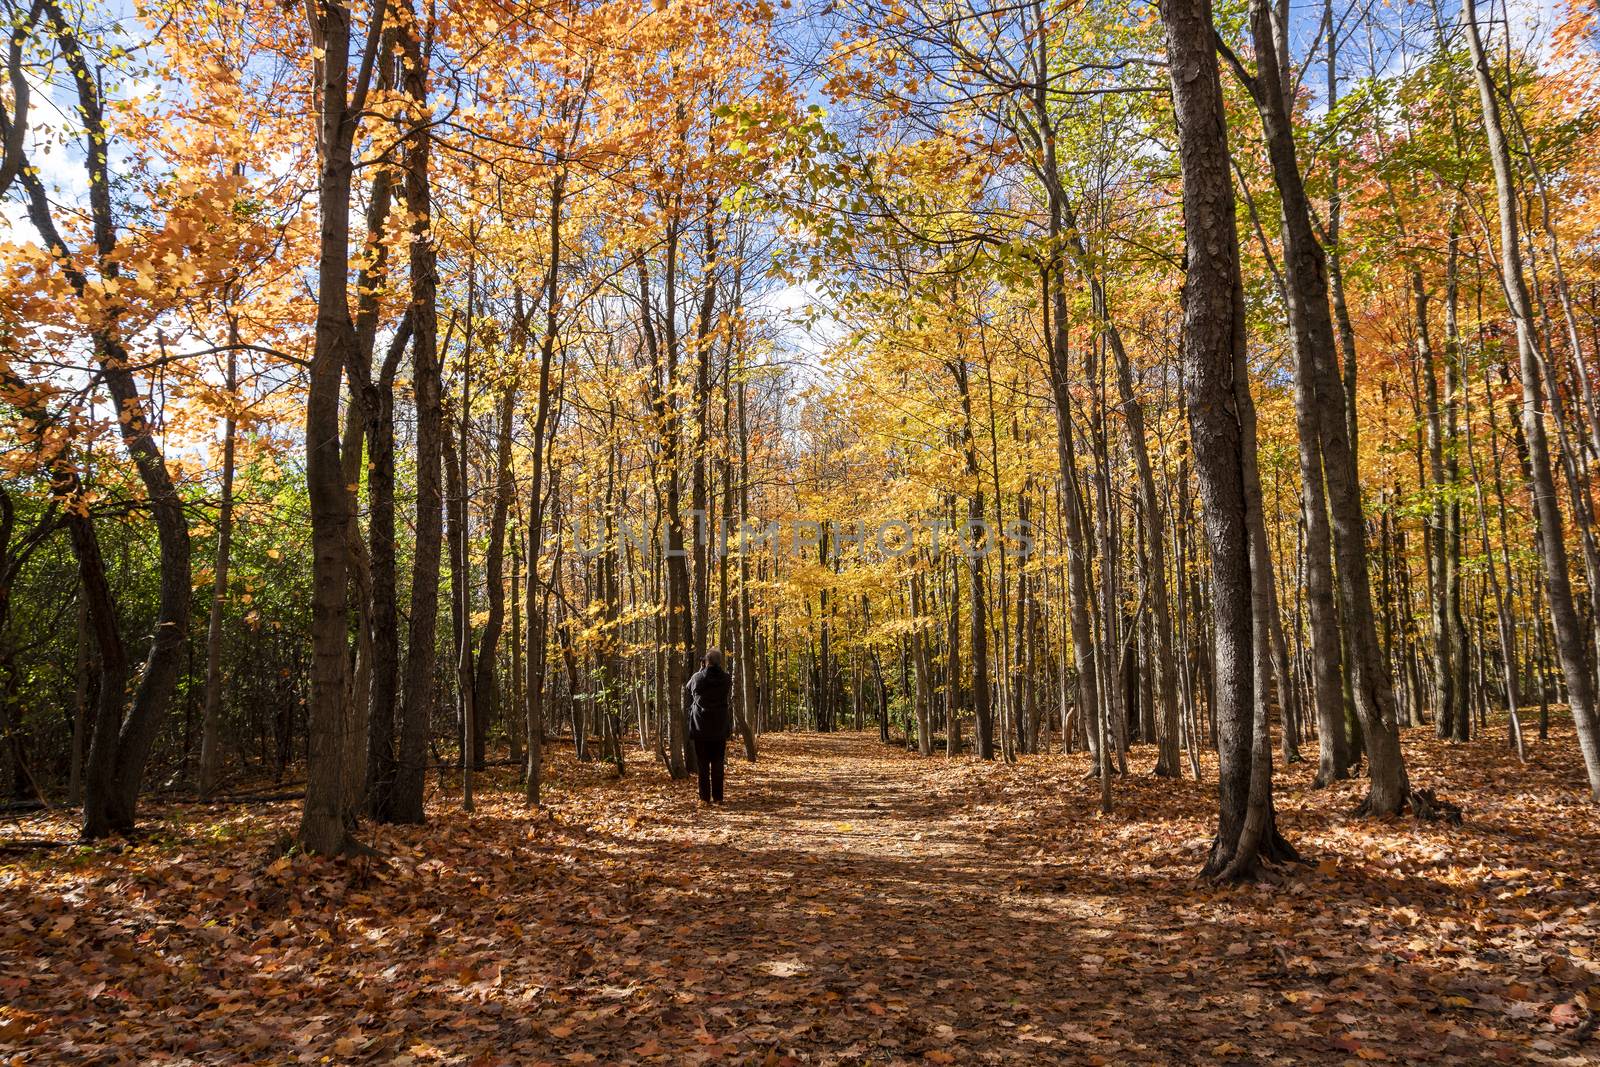 Photographer in the autumn, in a maple forest on looking for beautiful footage